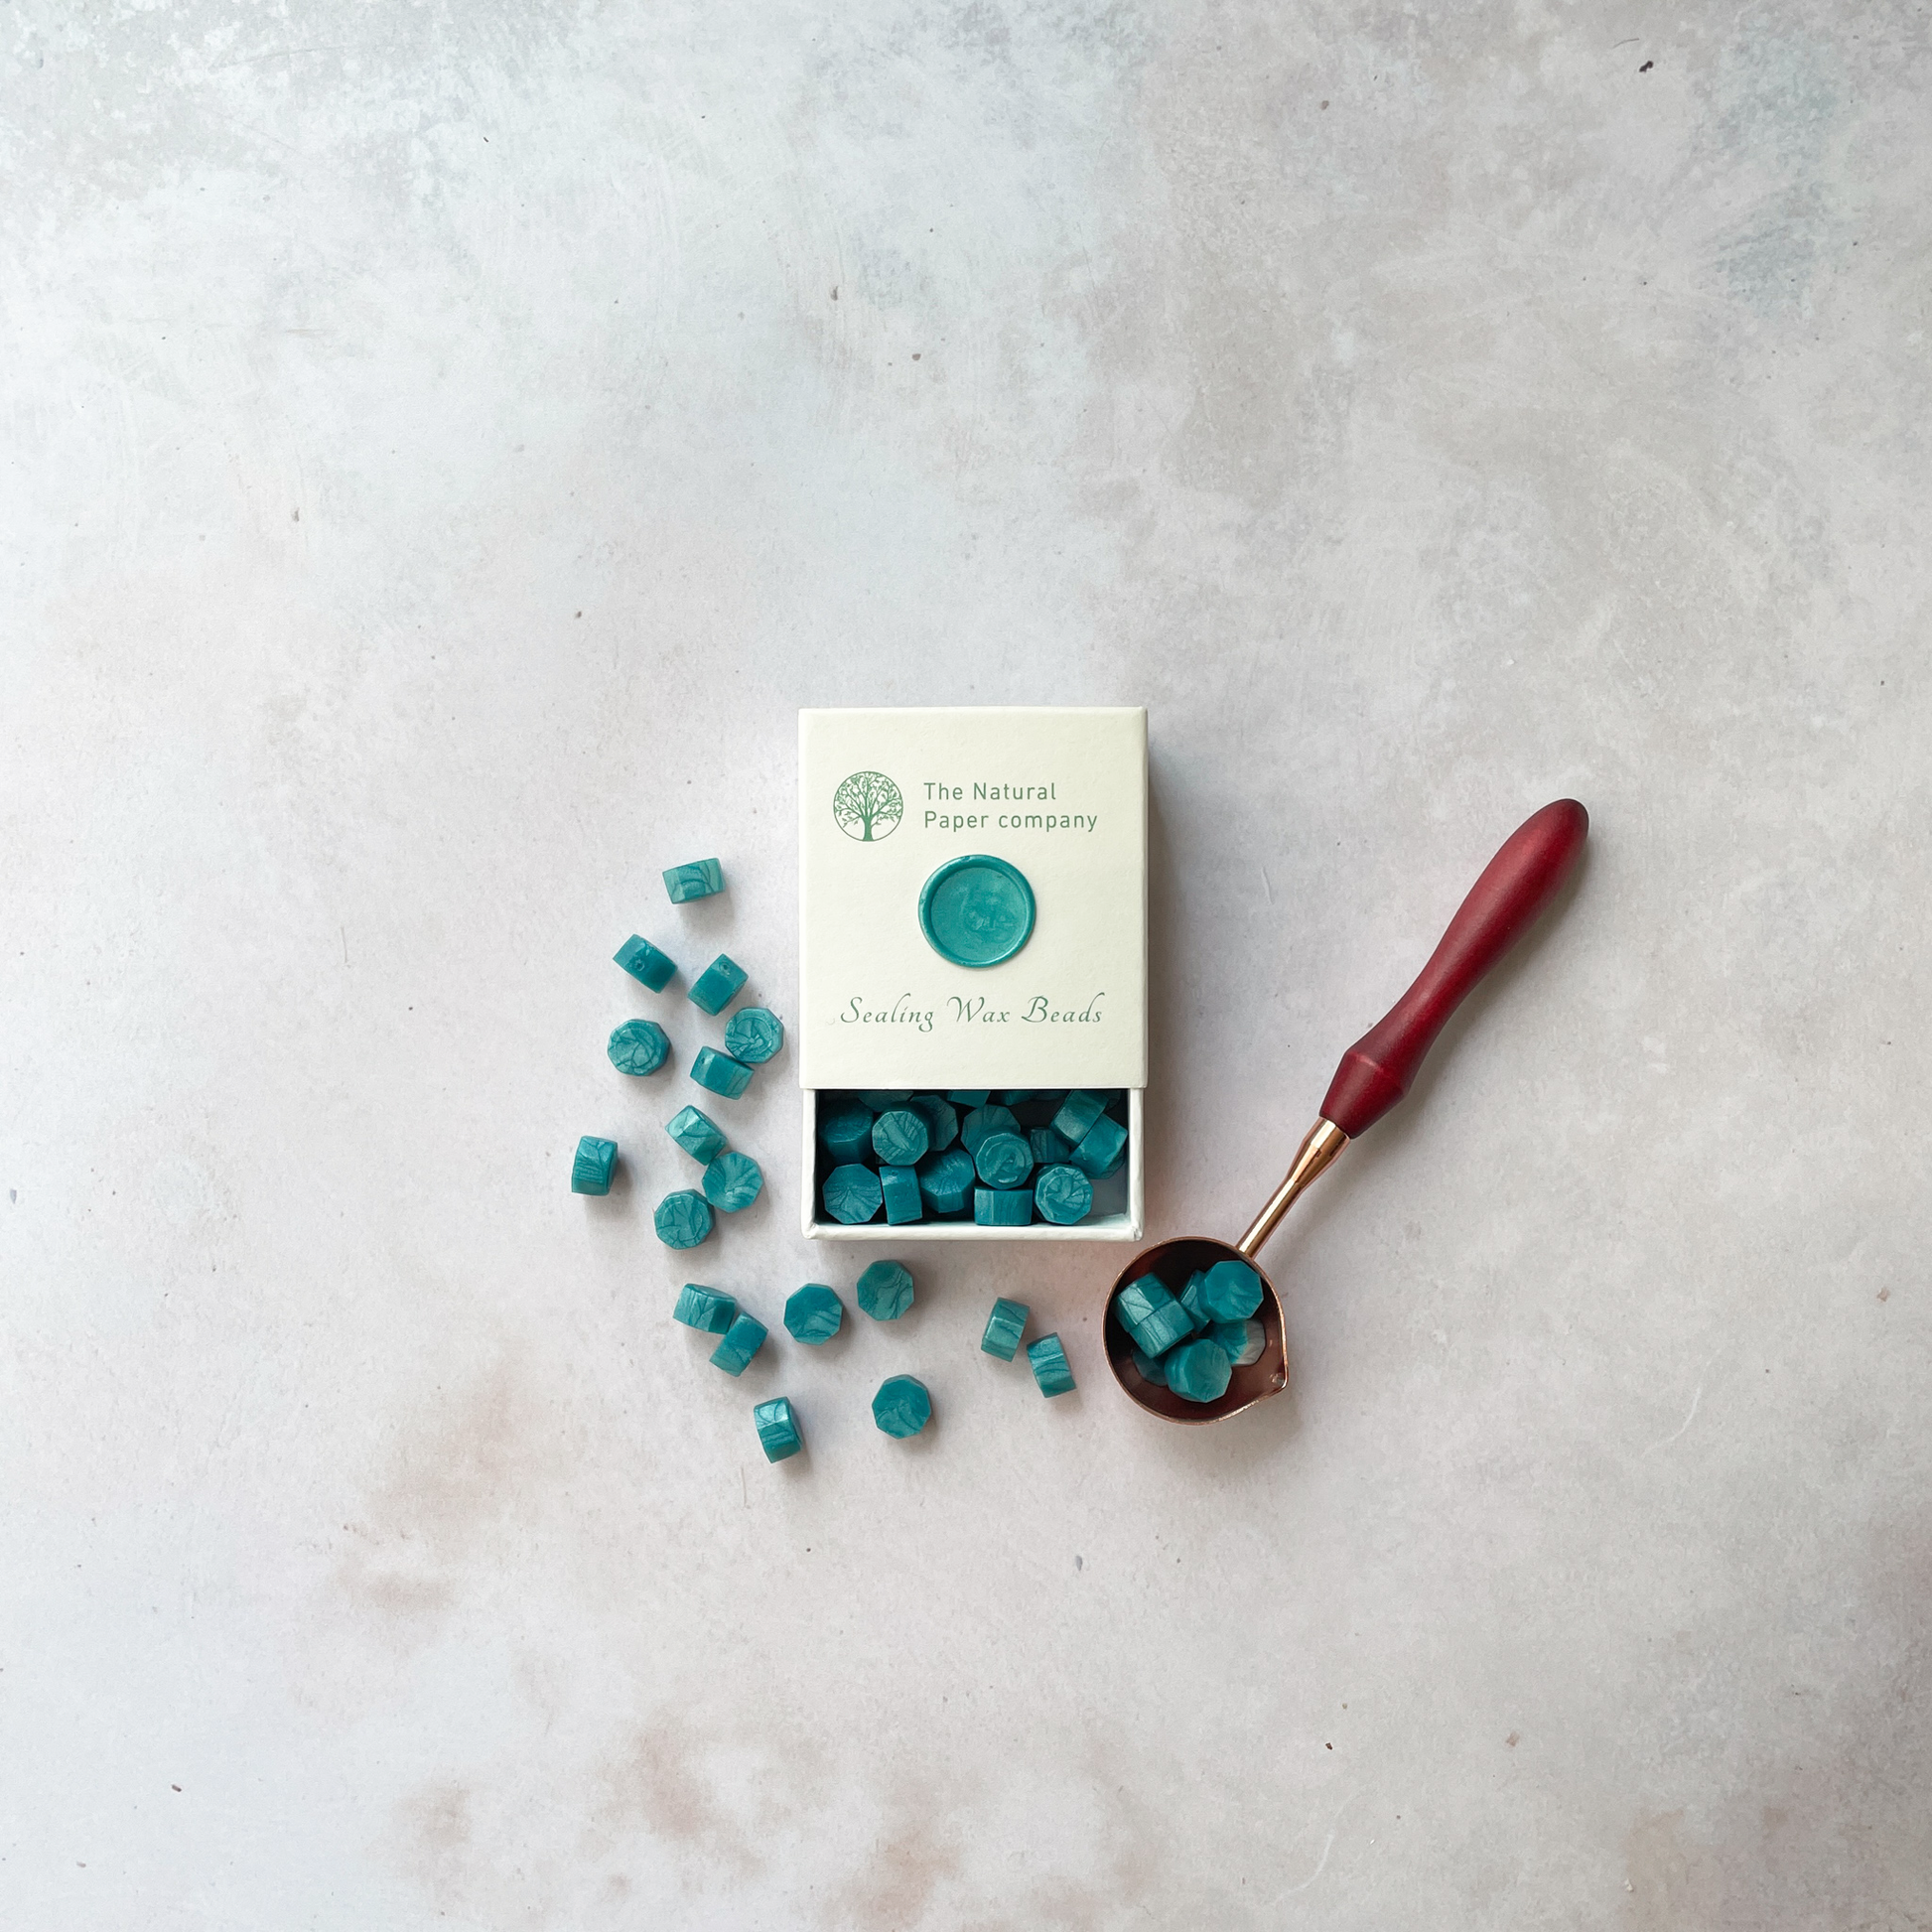 Sea green sealing wax beads to make wax seals with a stamp.  Eco friendly wax for wax stamping.  By The Natural paper Company